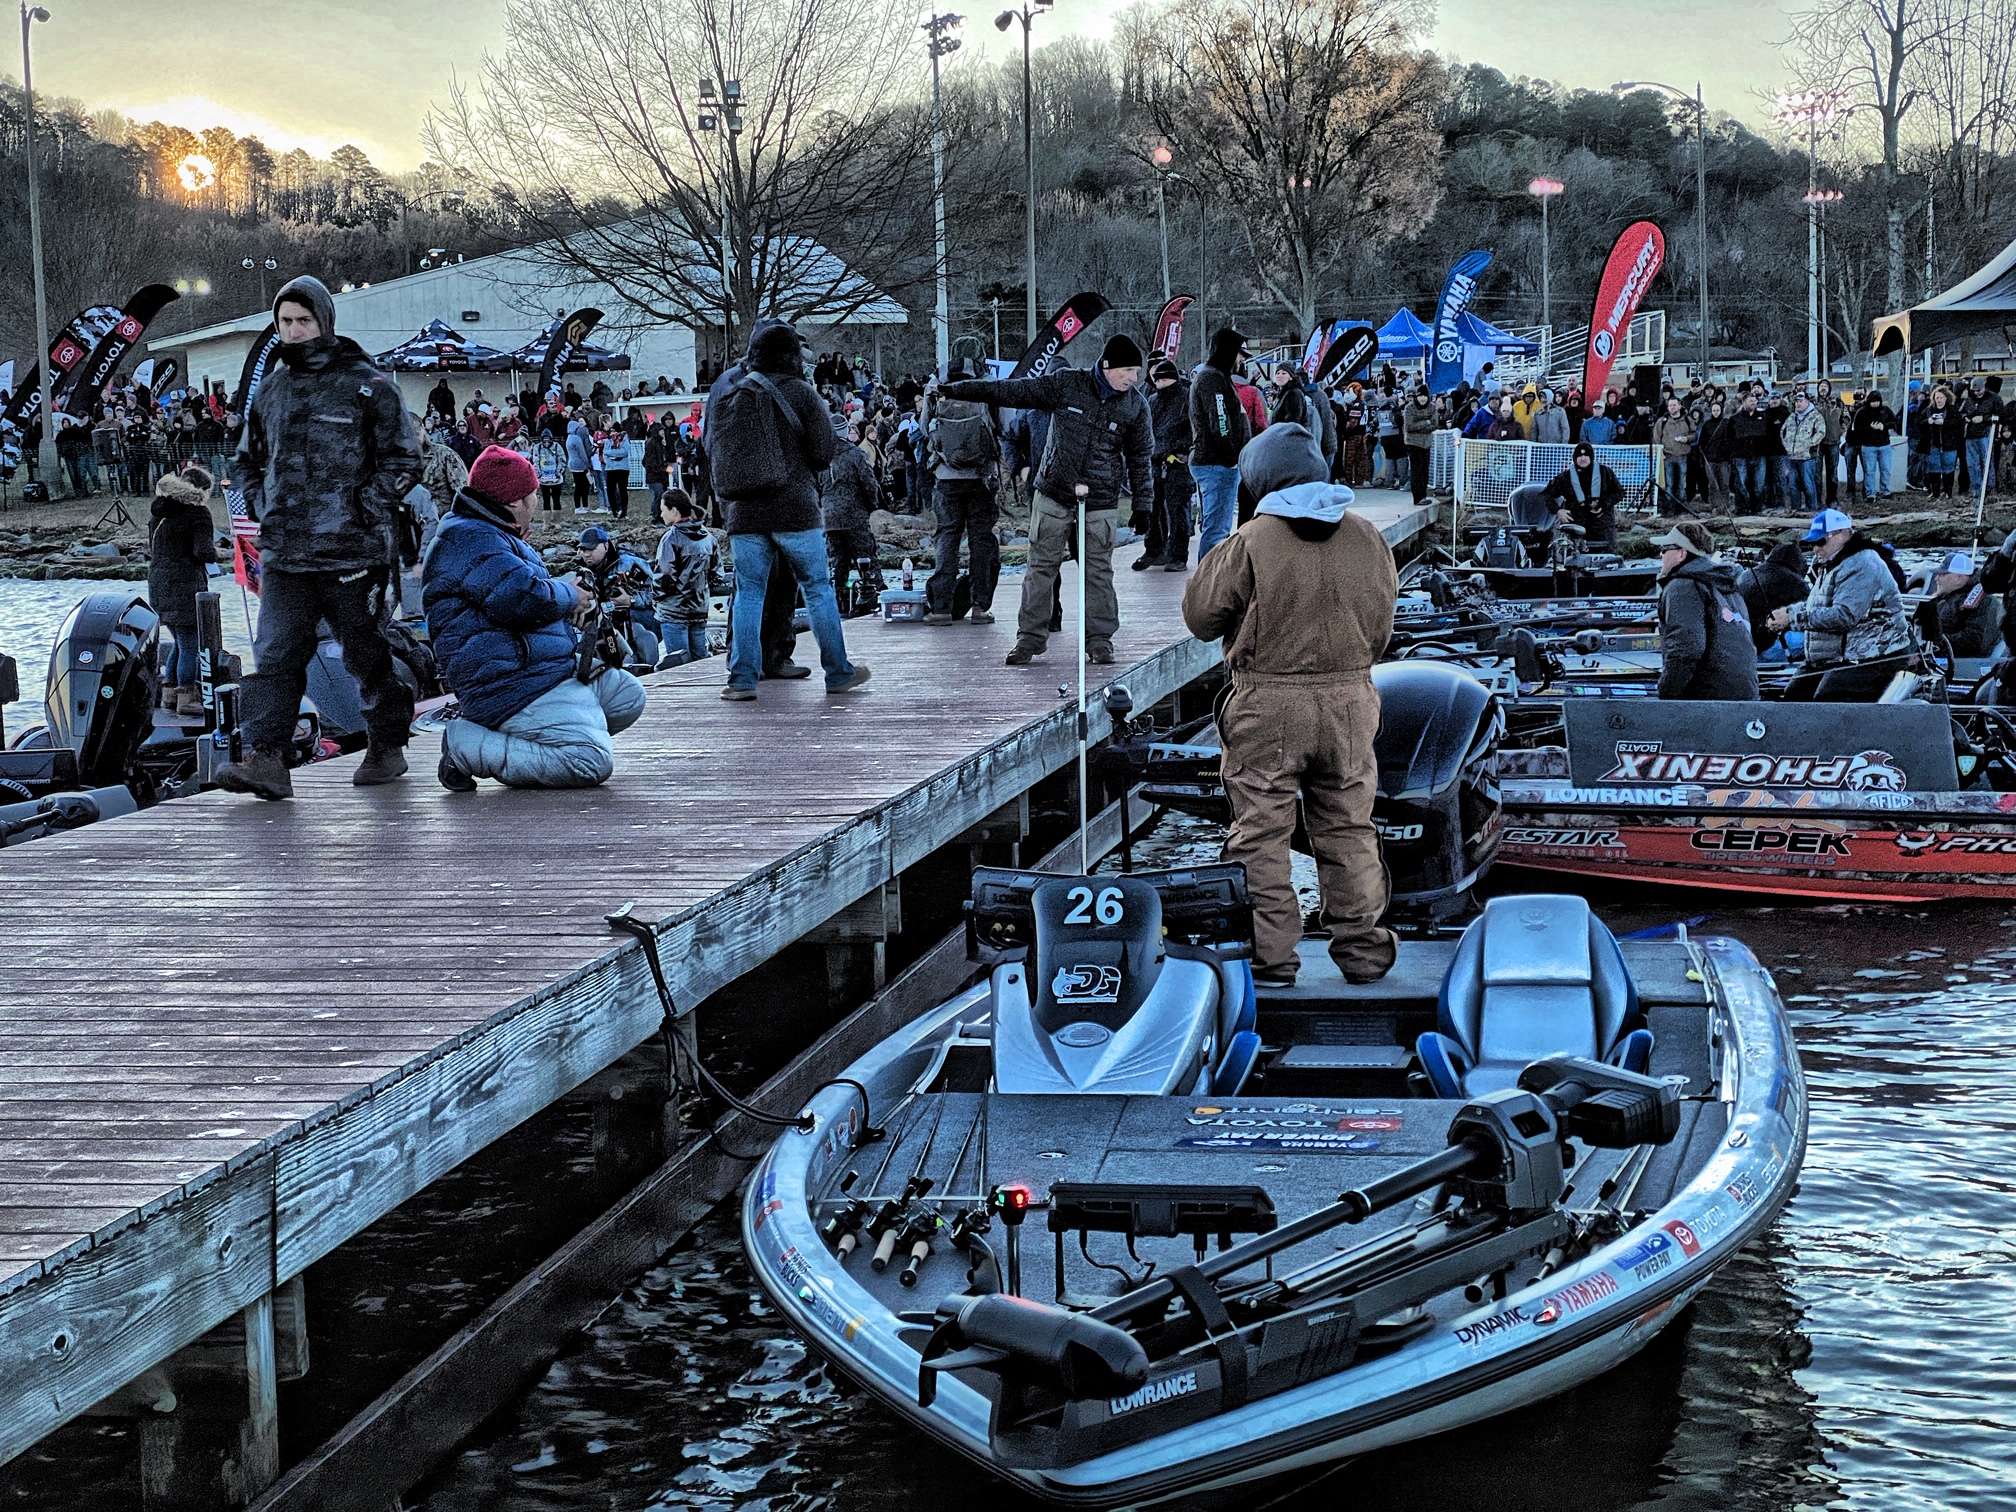 The sun comes up on a calmer morning with a good crowd at the launch for Day 2 of the 2020 Bassmaster Classic.